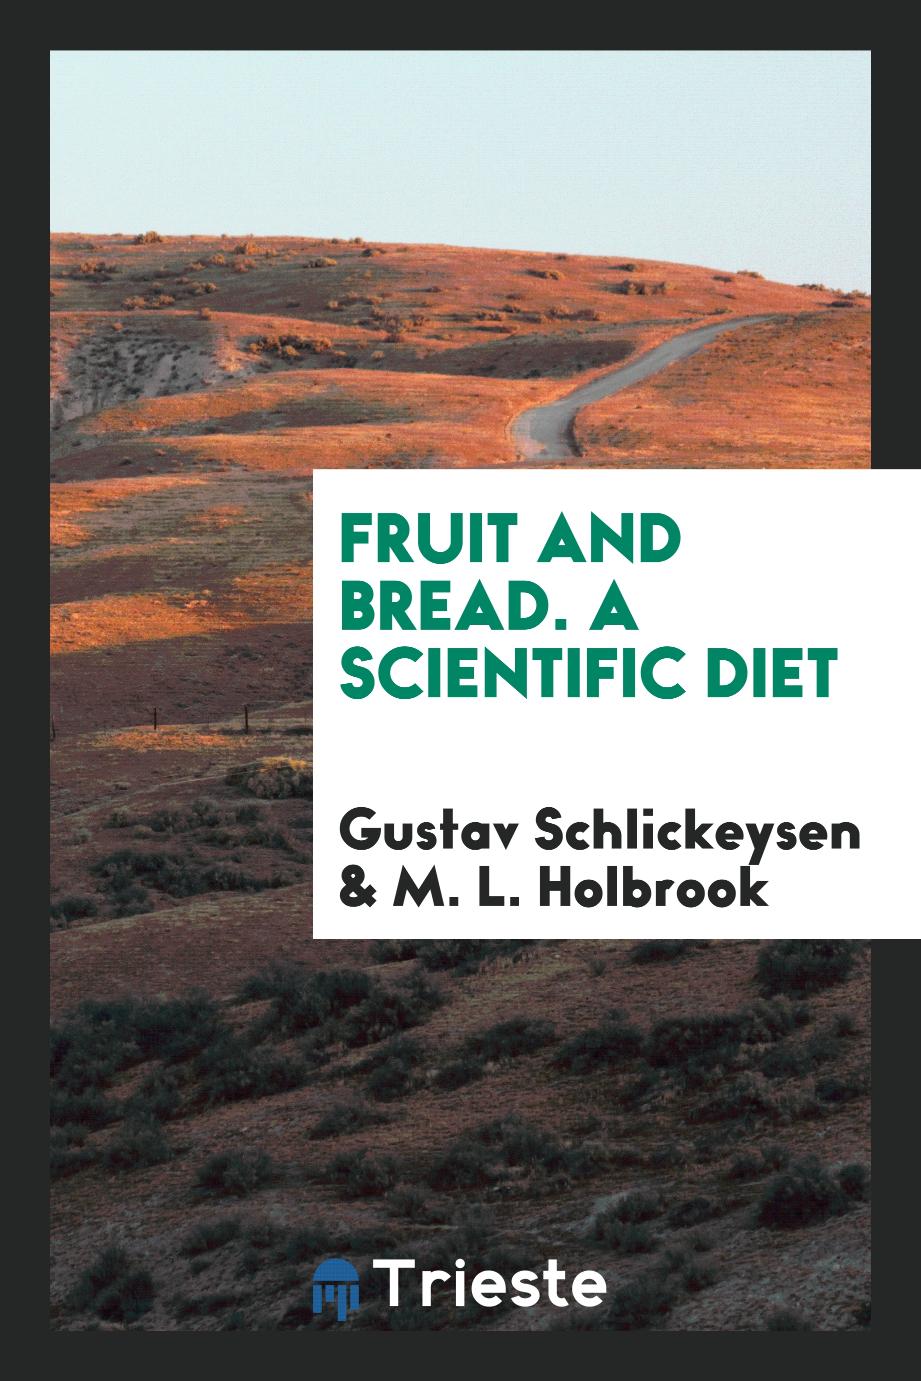 Fruit and Bread. A Scientific Diet